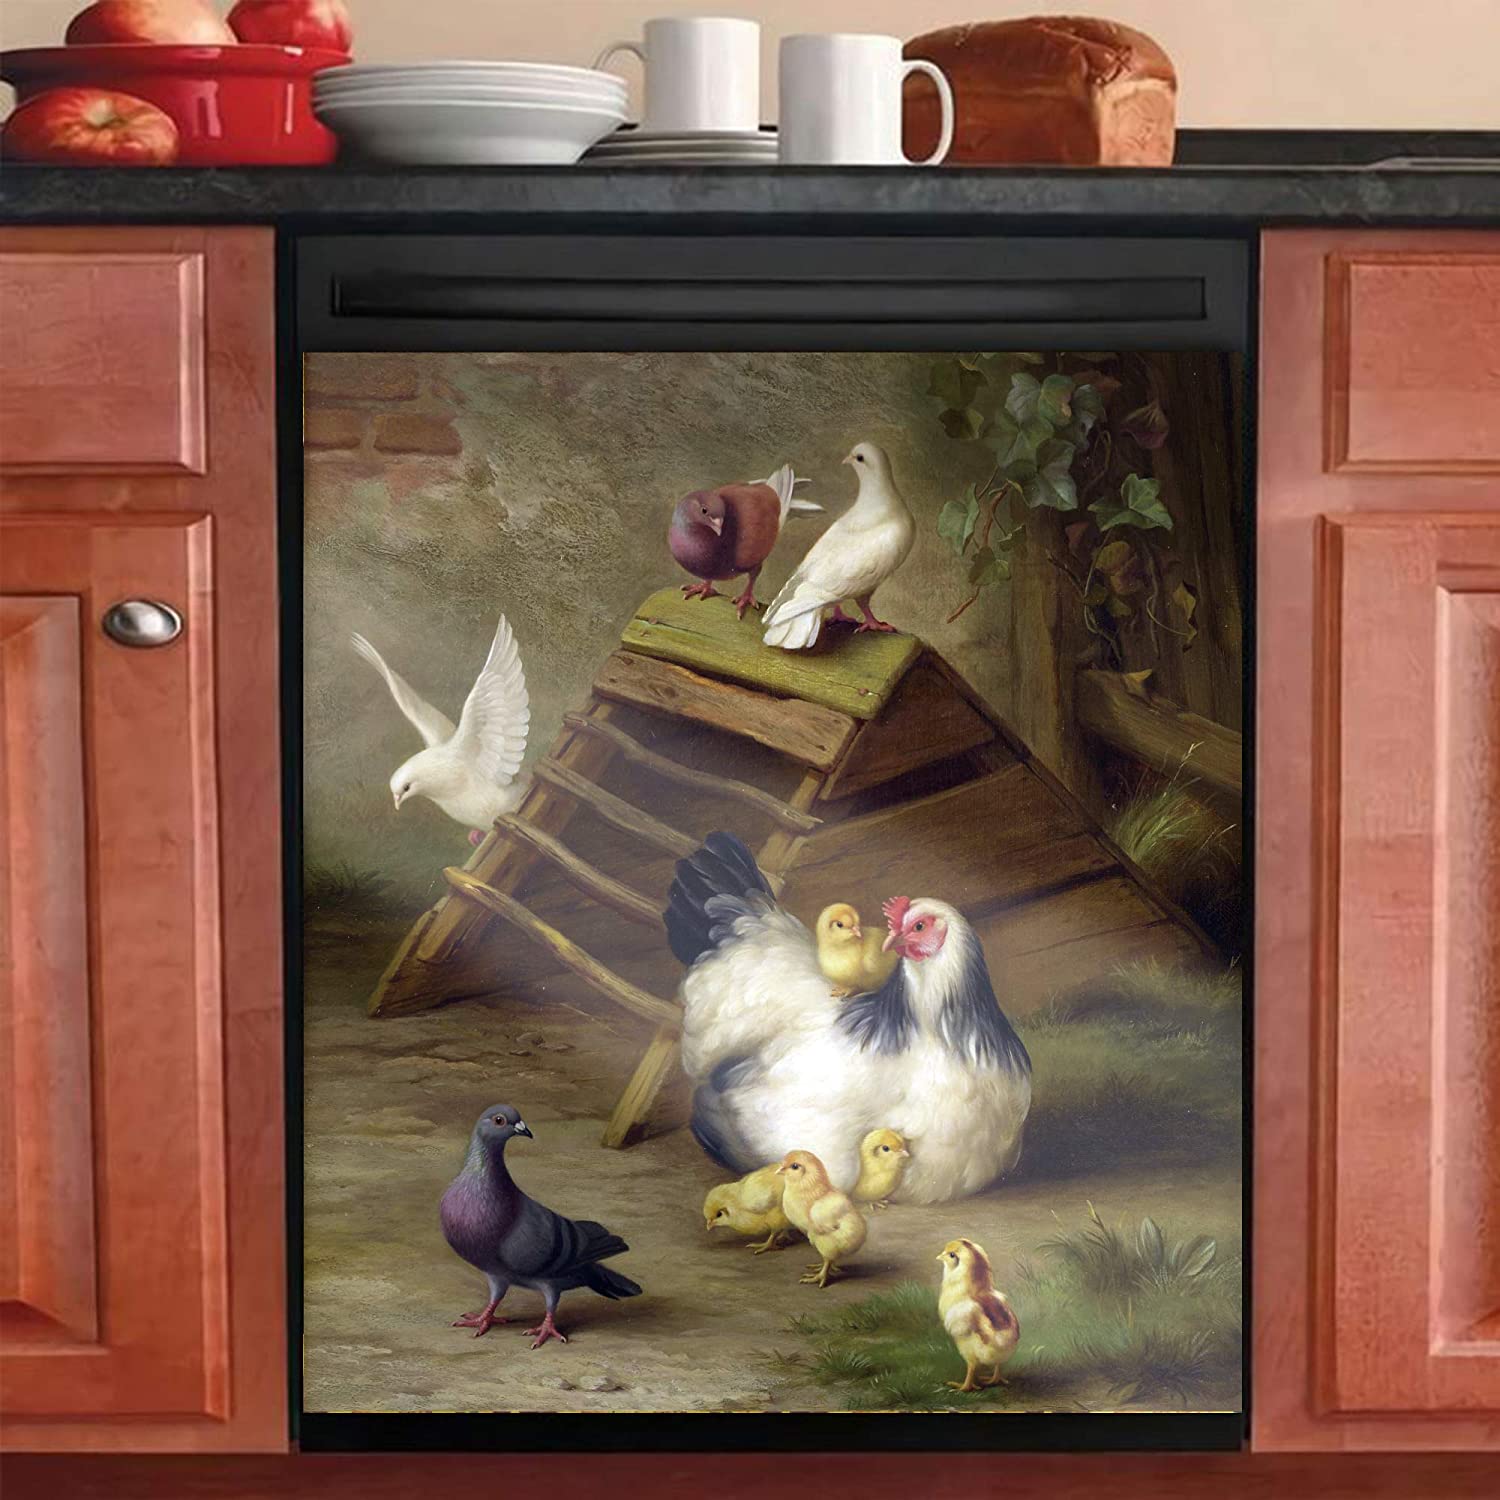 Chicken Coop Dishwasher Cover - Funny Chicken Dishwasher cover